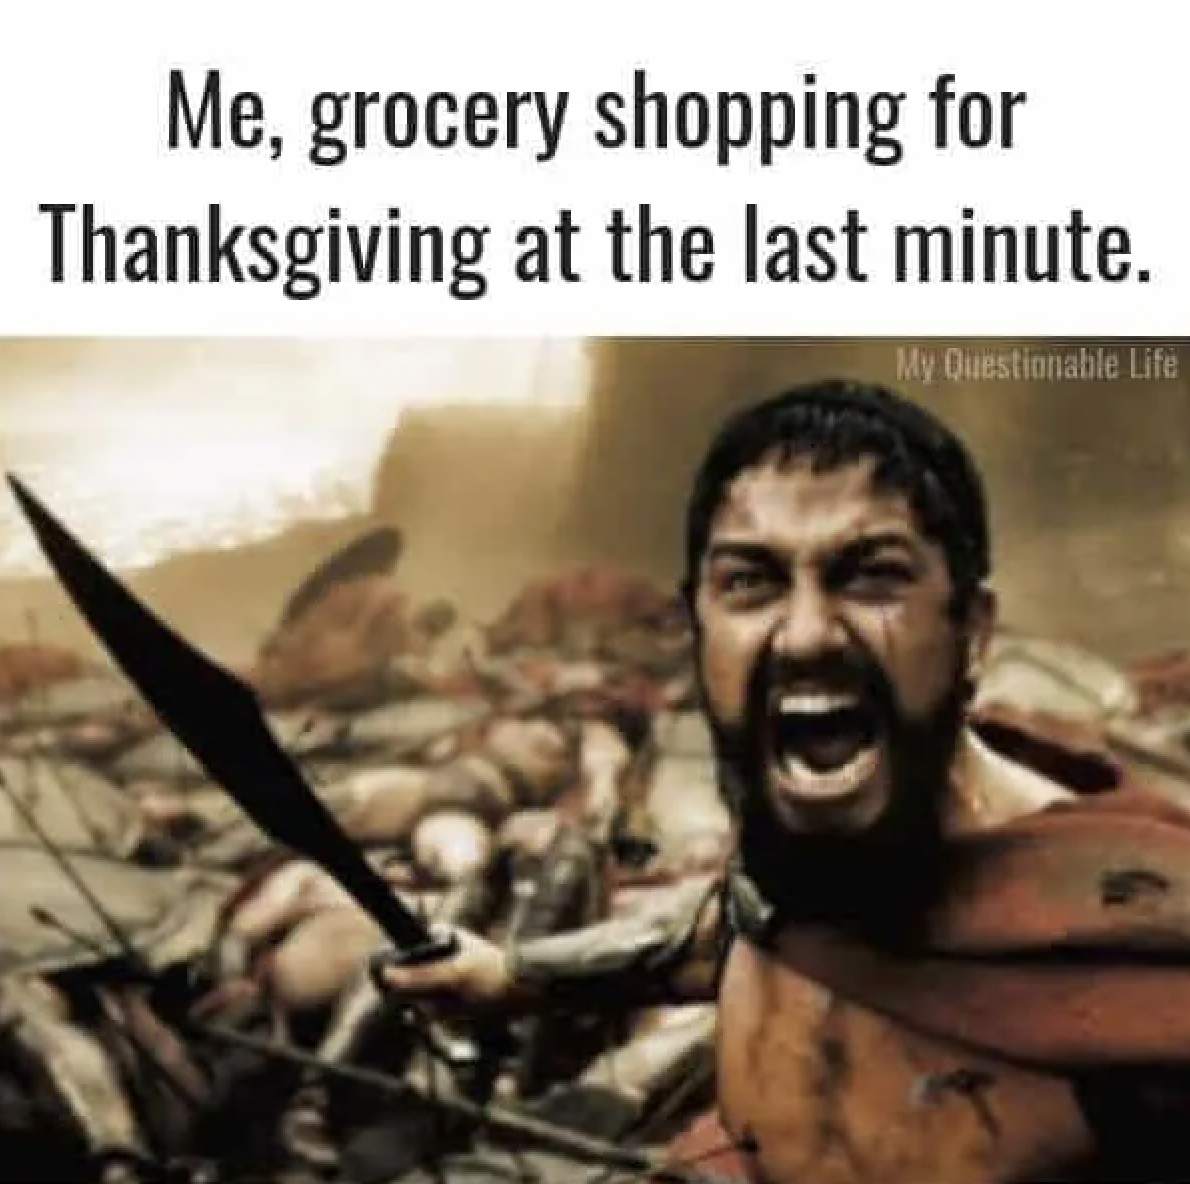 thanksgiving meme funny - Me, grocery shopping for Thanksgiving at the last minute. My Questionable Life